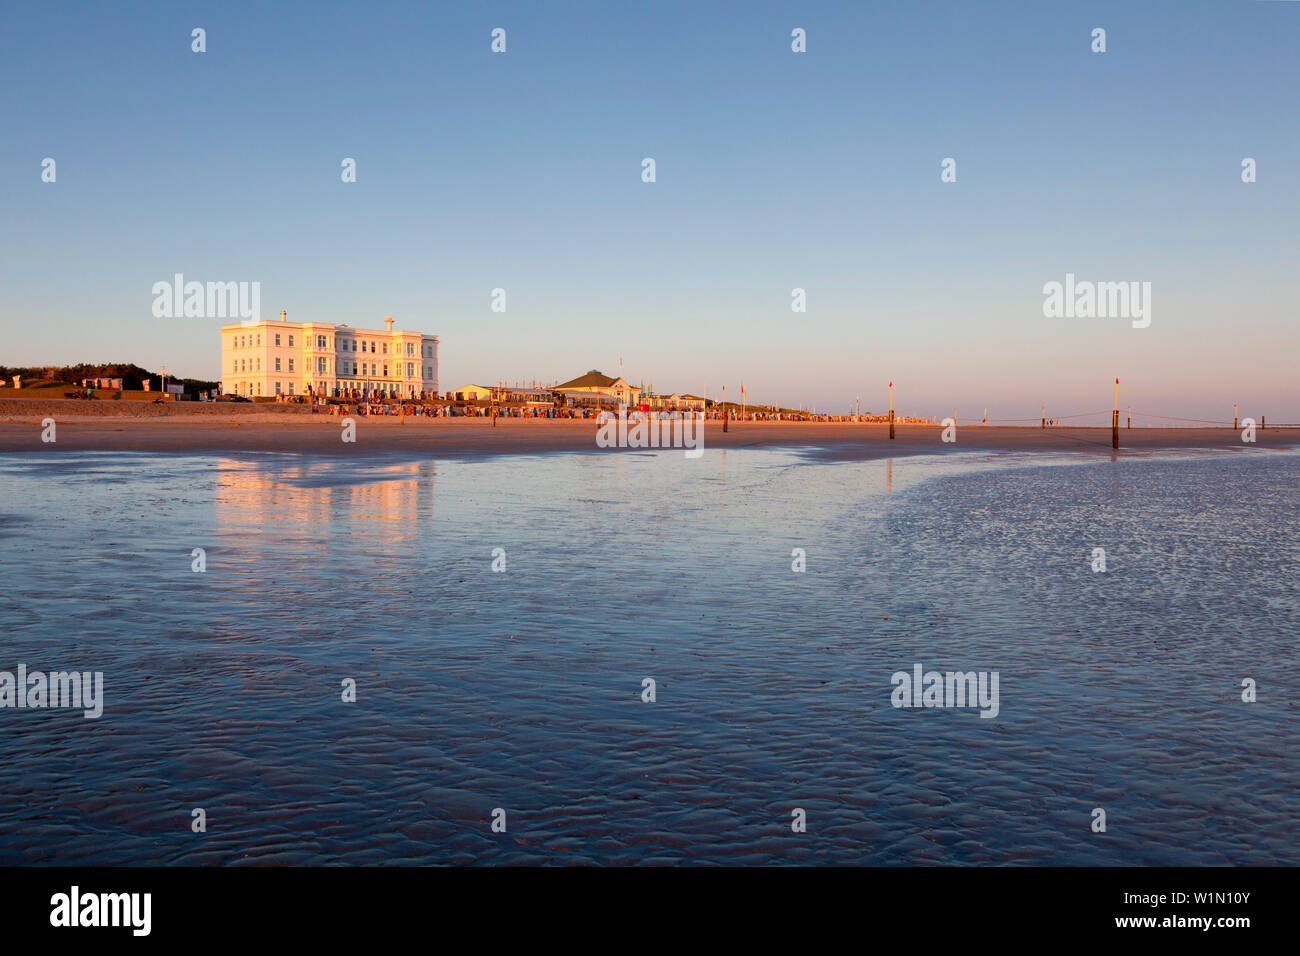 Weststrand in the evening, Norderney, Ostfriesland, Lower Saxony, Germany Stock Photo